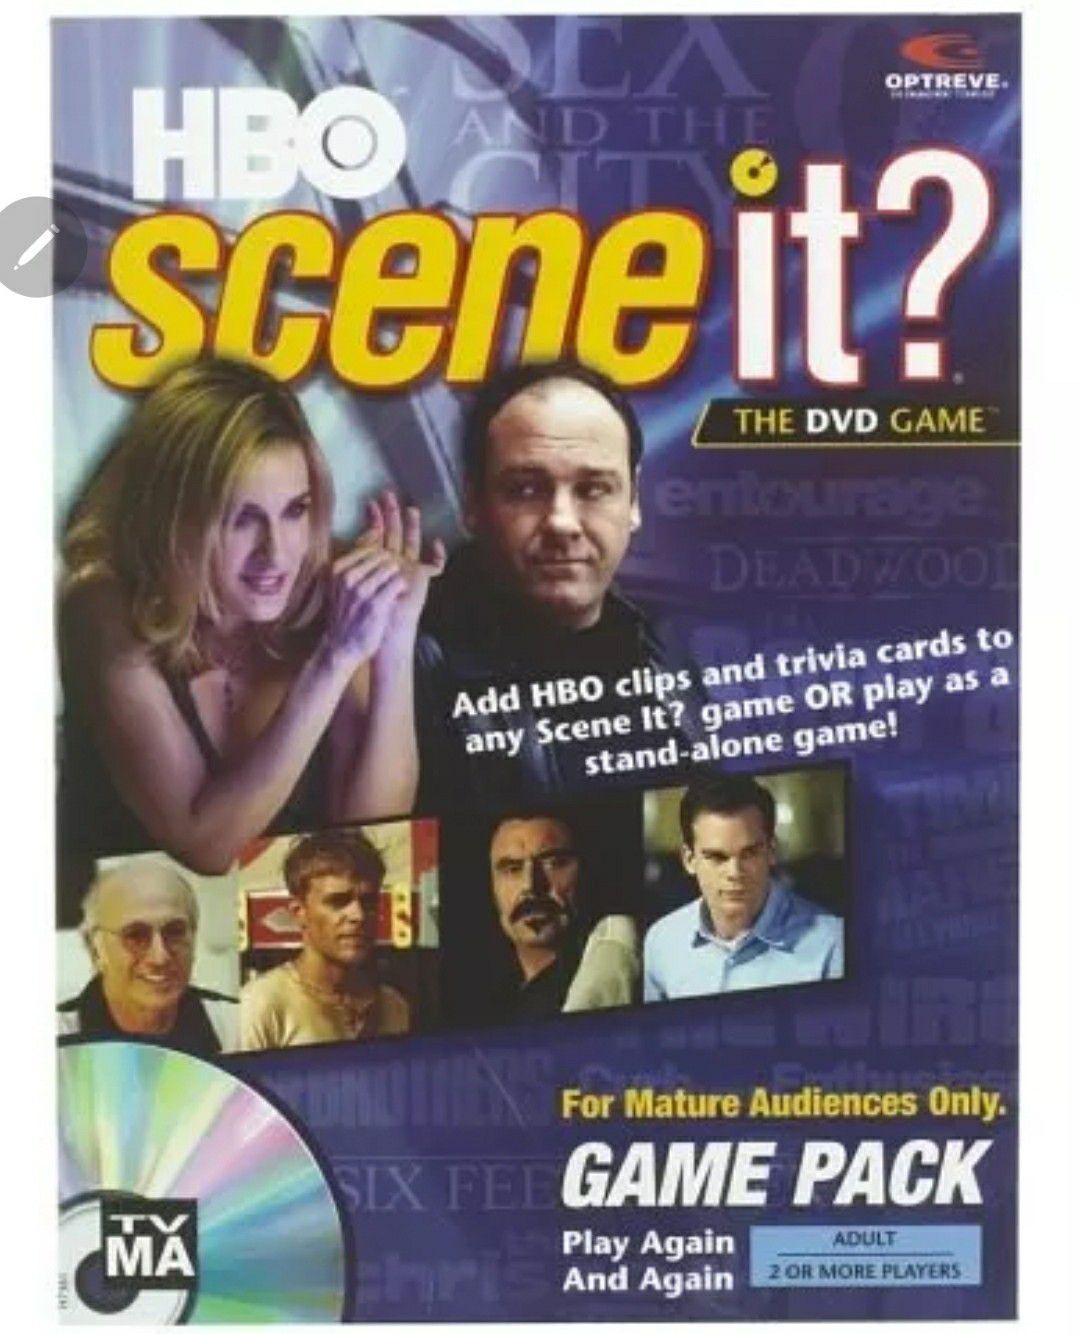 HBO SCENE IT? DVD Game Expansion Pack Sopranos Sex City Curb Your Enthusiasm